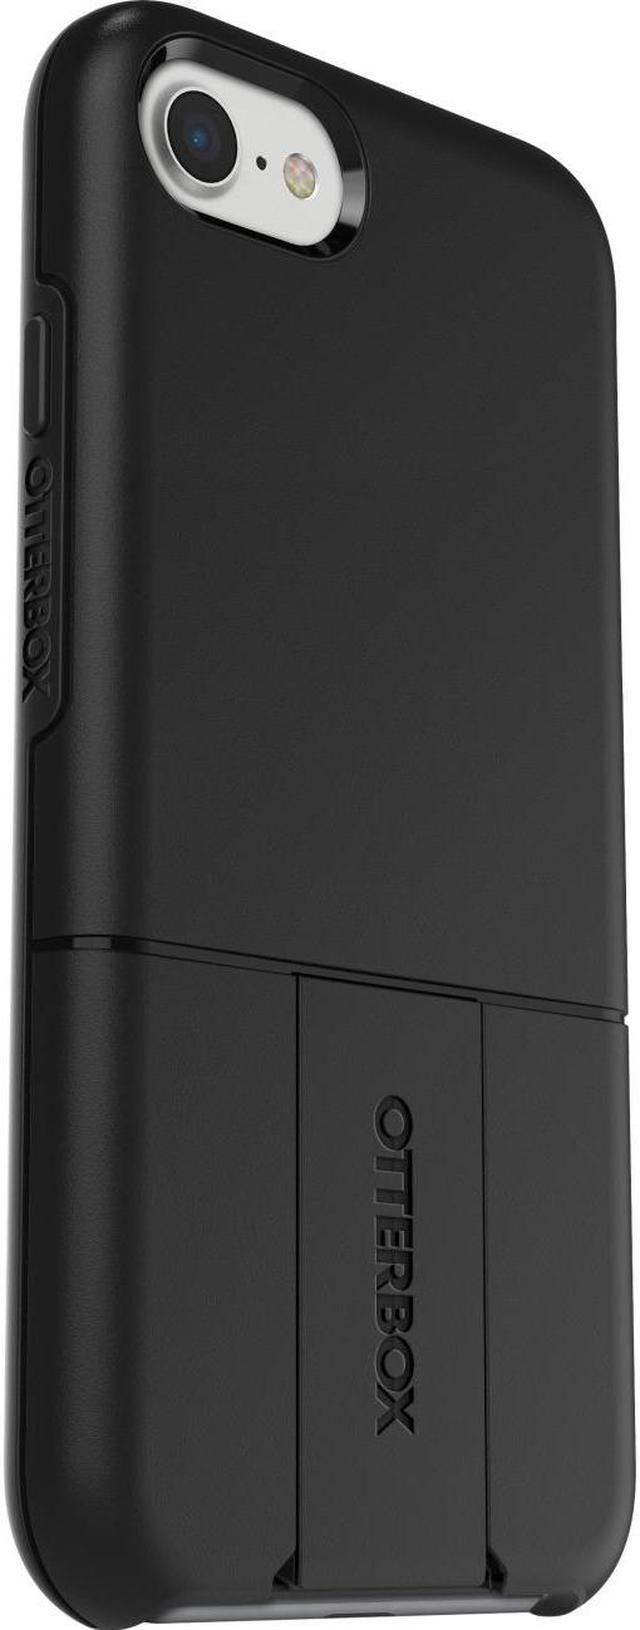 OtterBox 77-56783 Universe Case for iPhone 7 8, Black